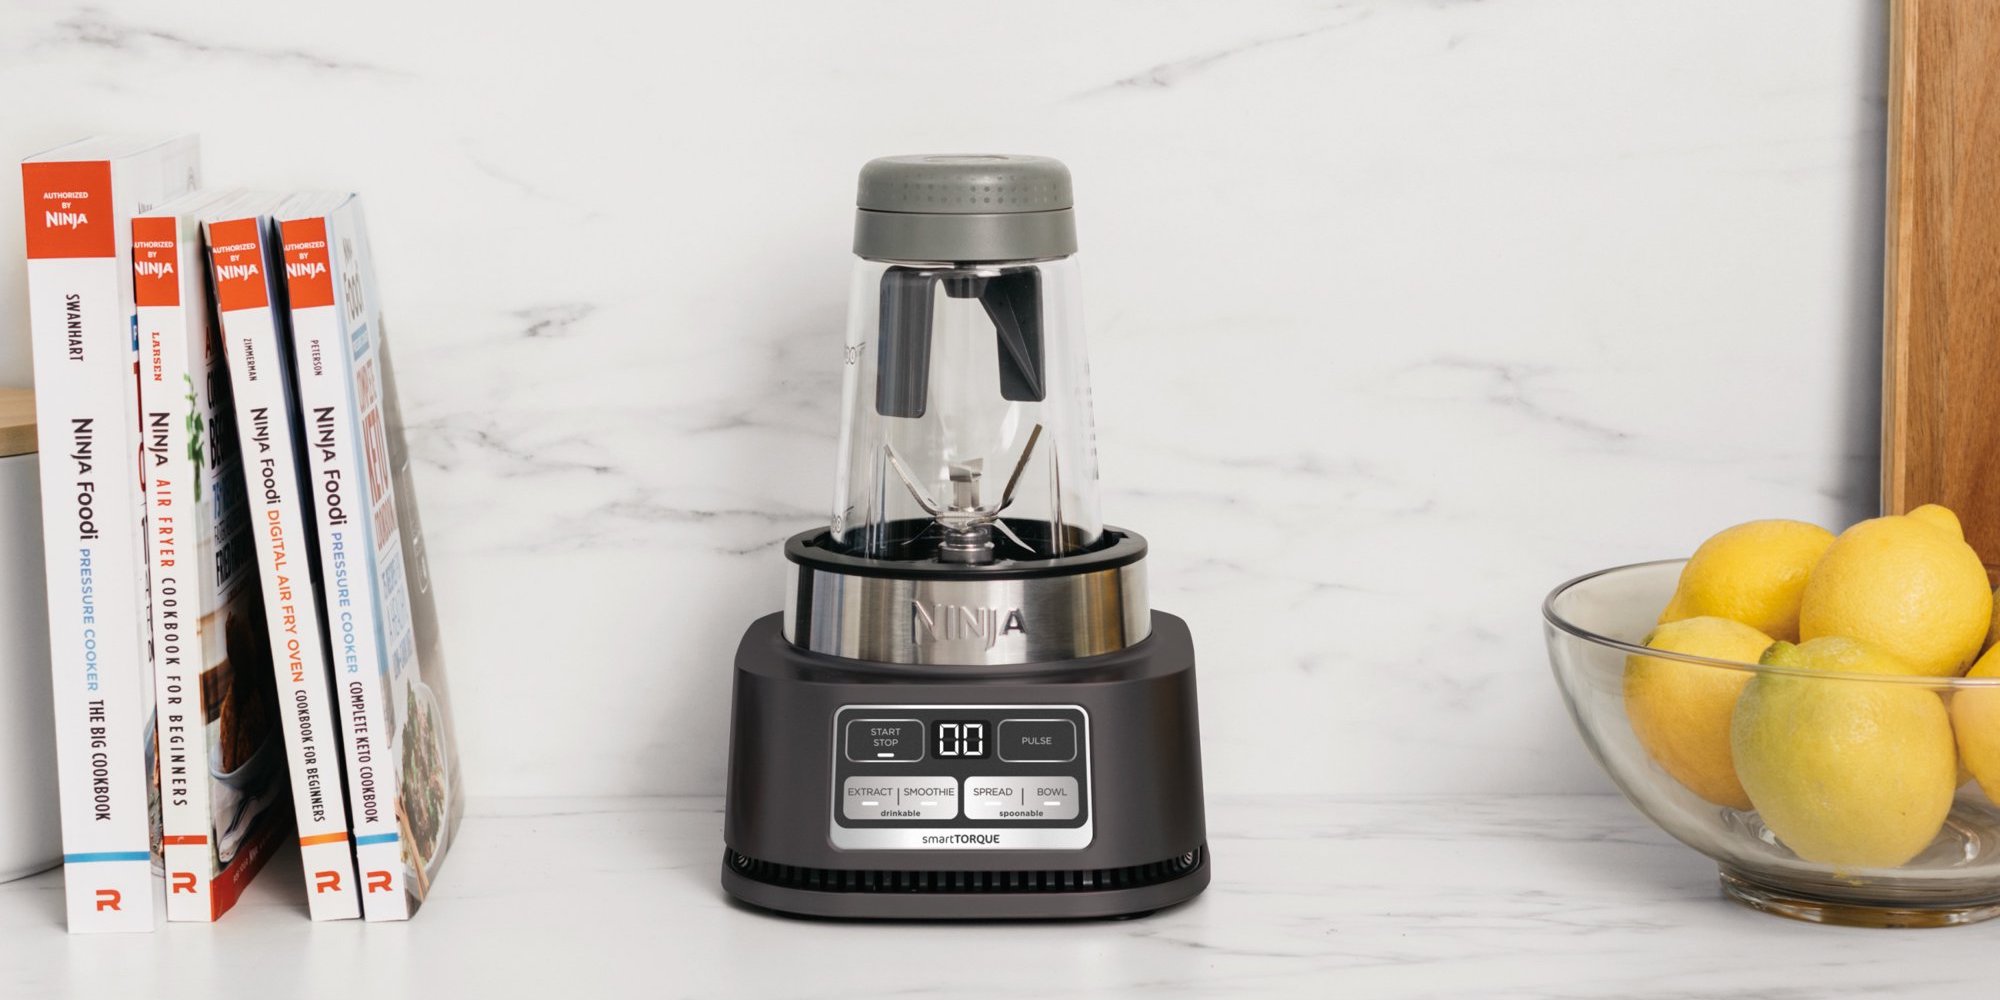 Personal smoothie makers and blenders from $20: Ninja, Magic